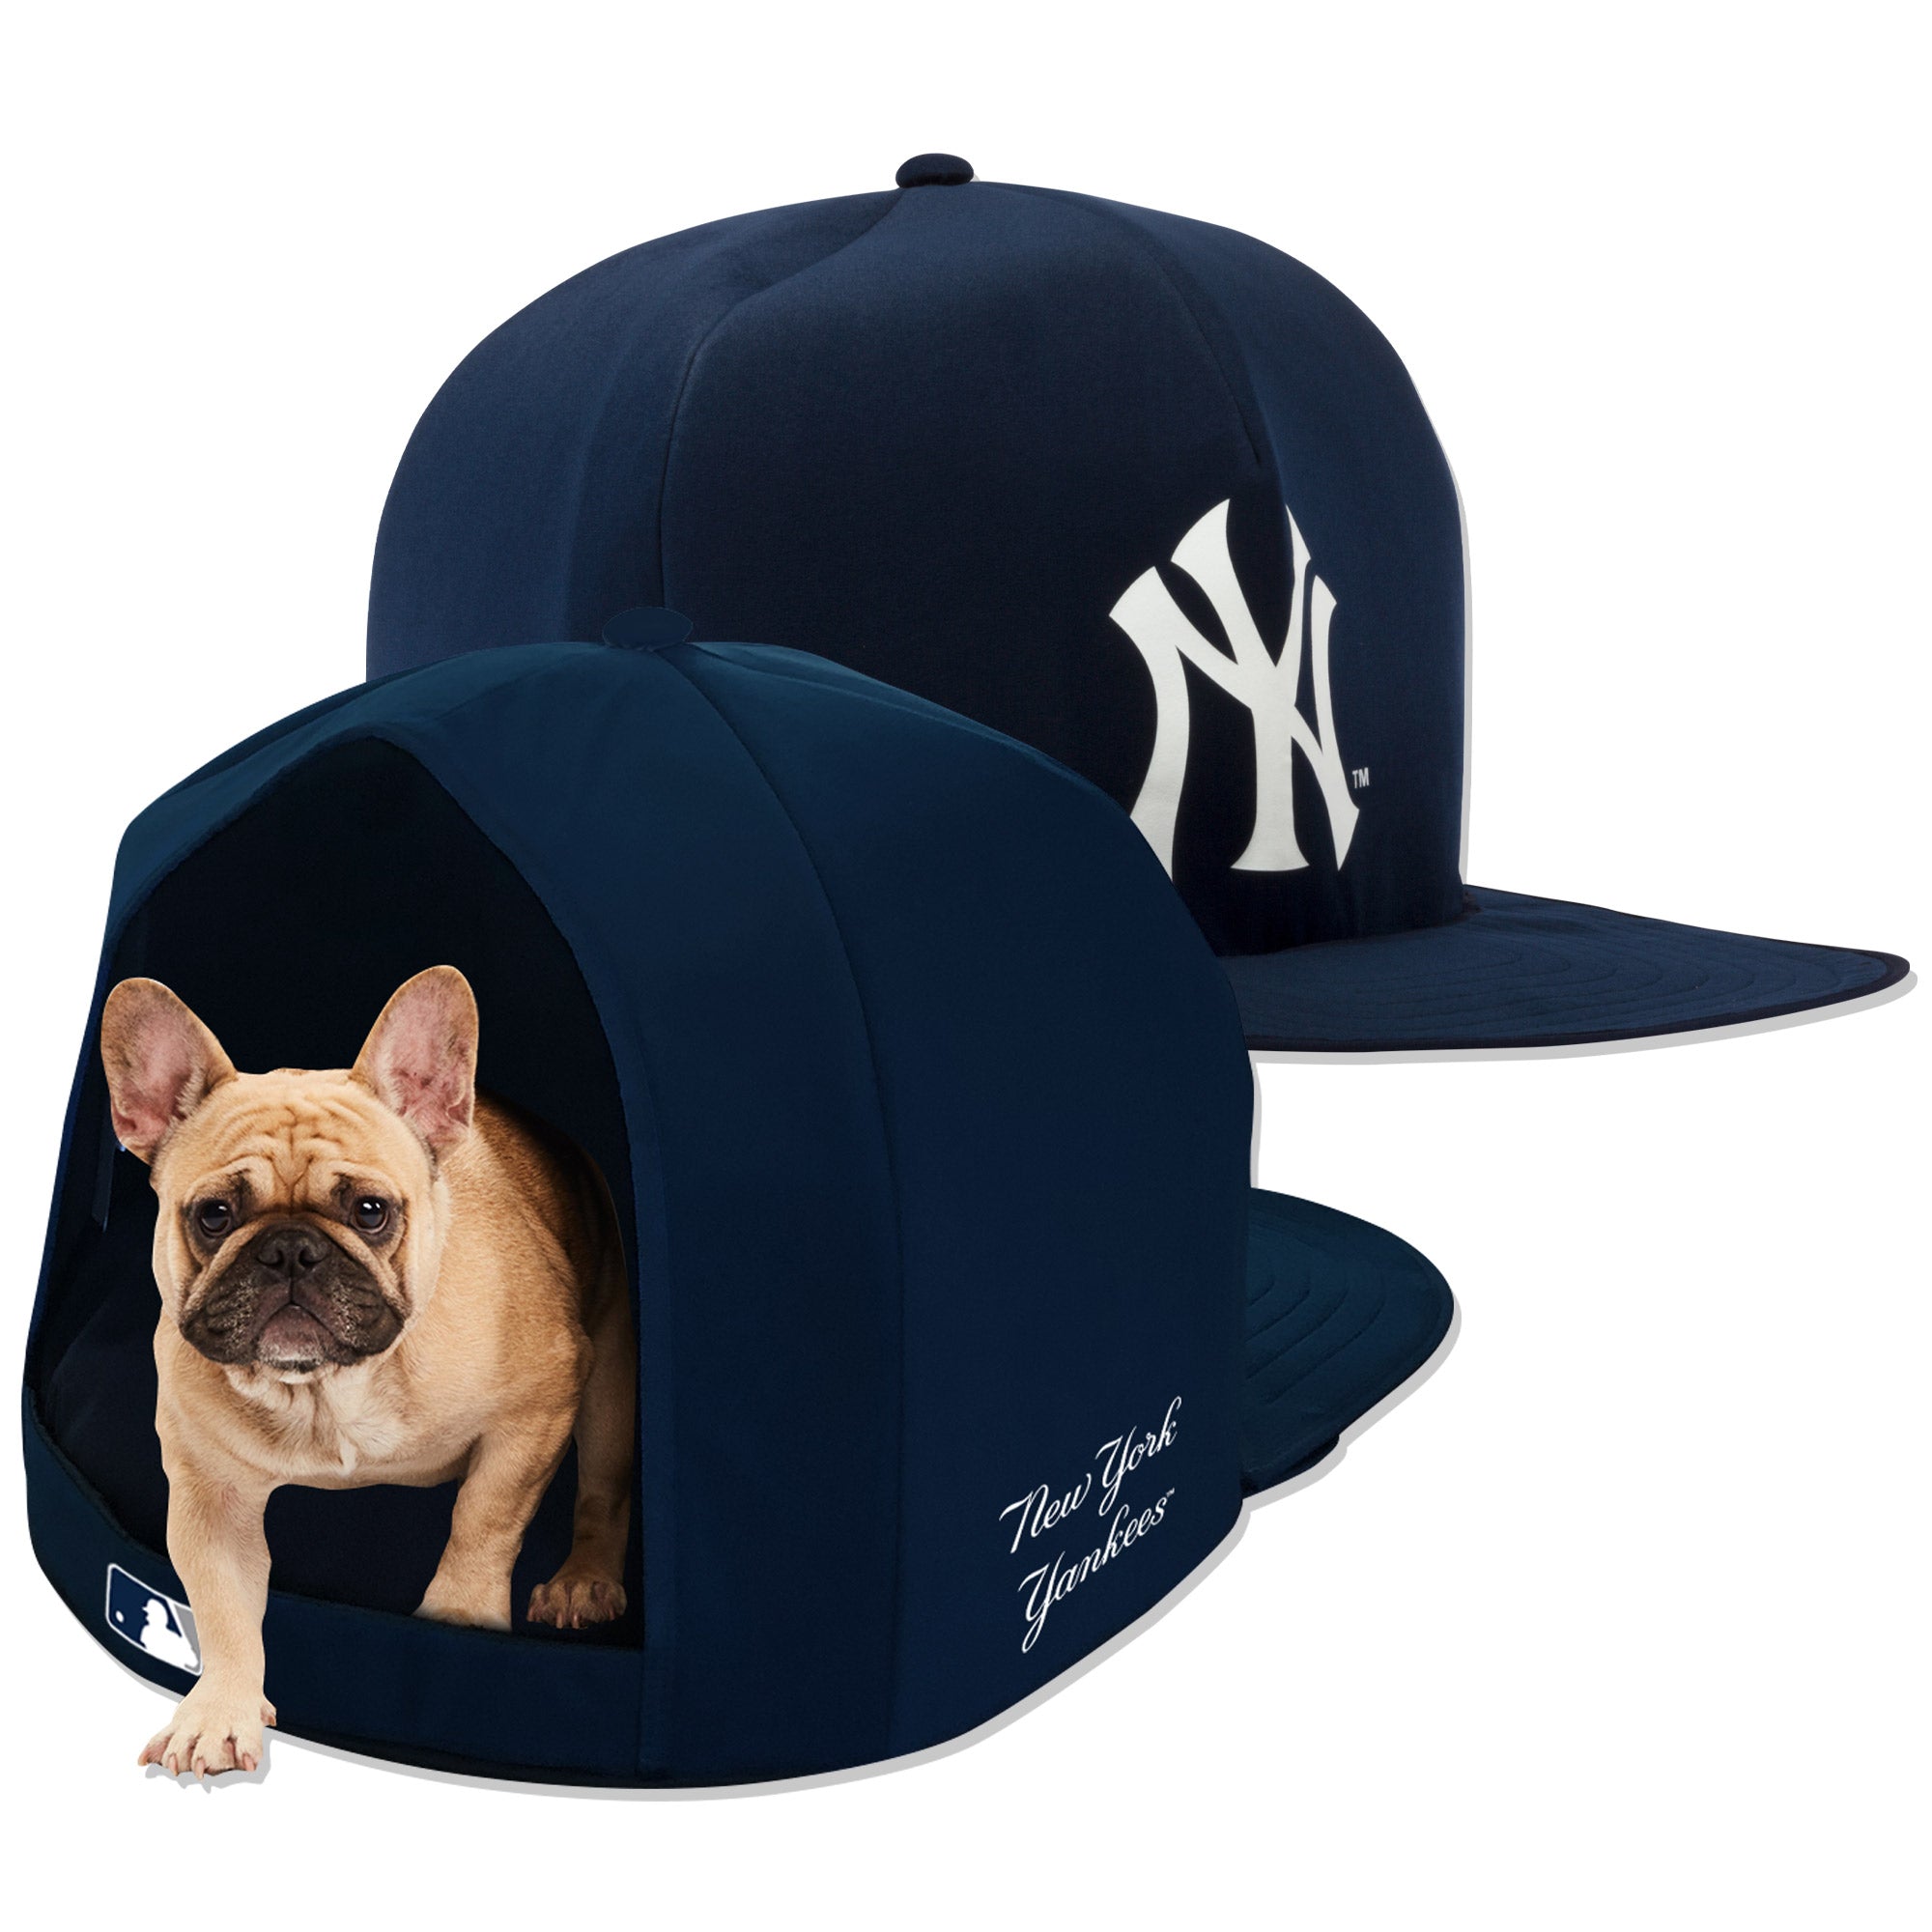 Dogs in Baseball Hats Dogs cute ny Yankees --- You want to train